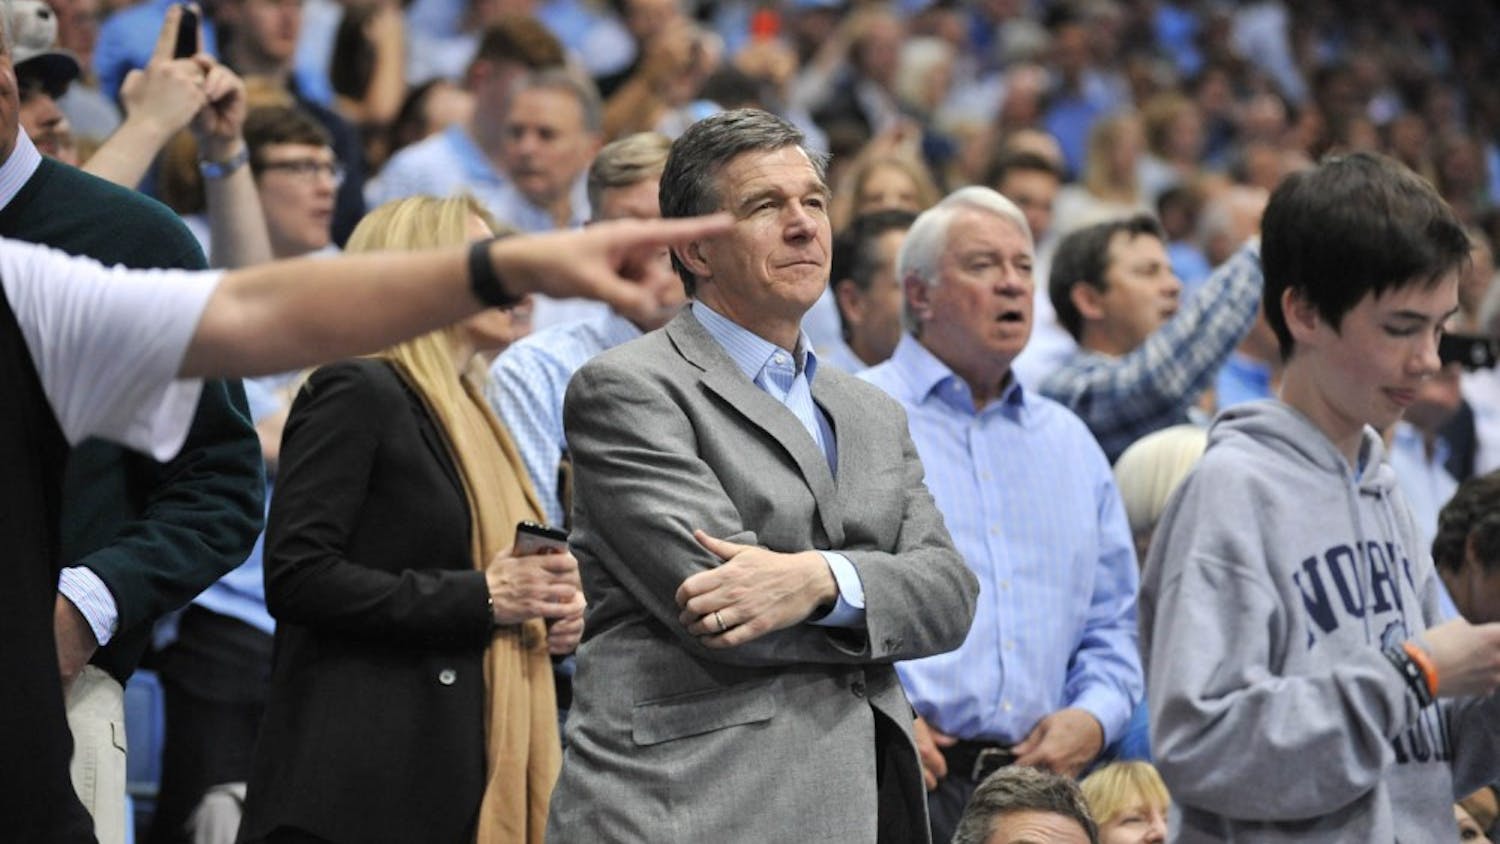 N.C. Governor Roy Cooper looks on at the UNC-Duke game.&nbsp;